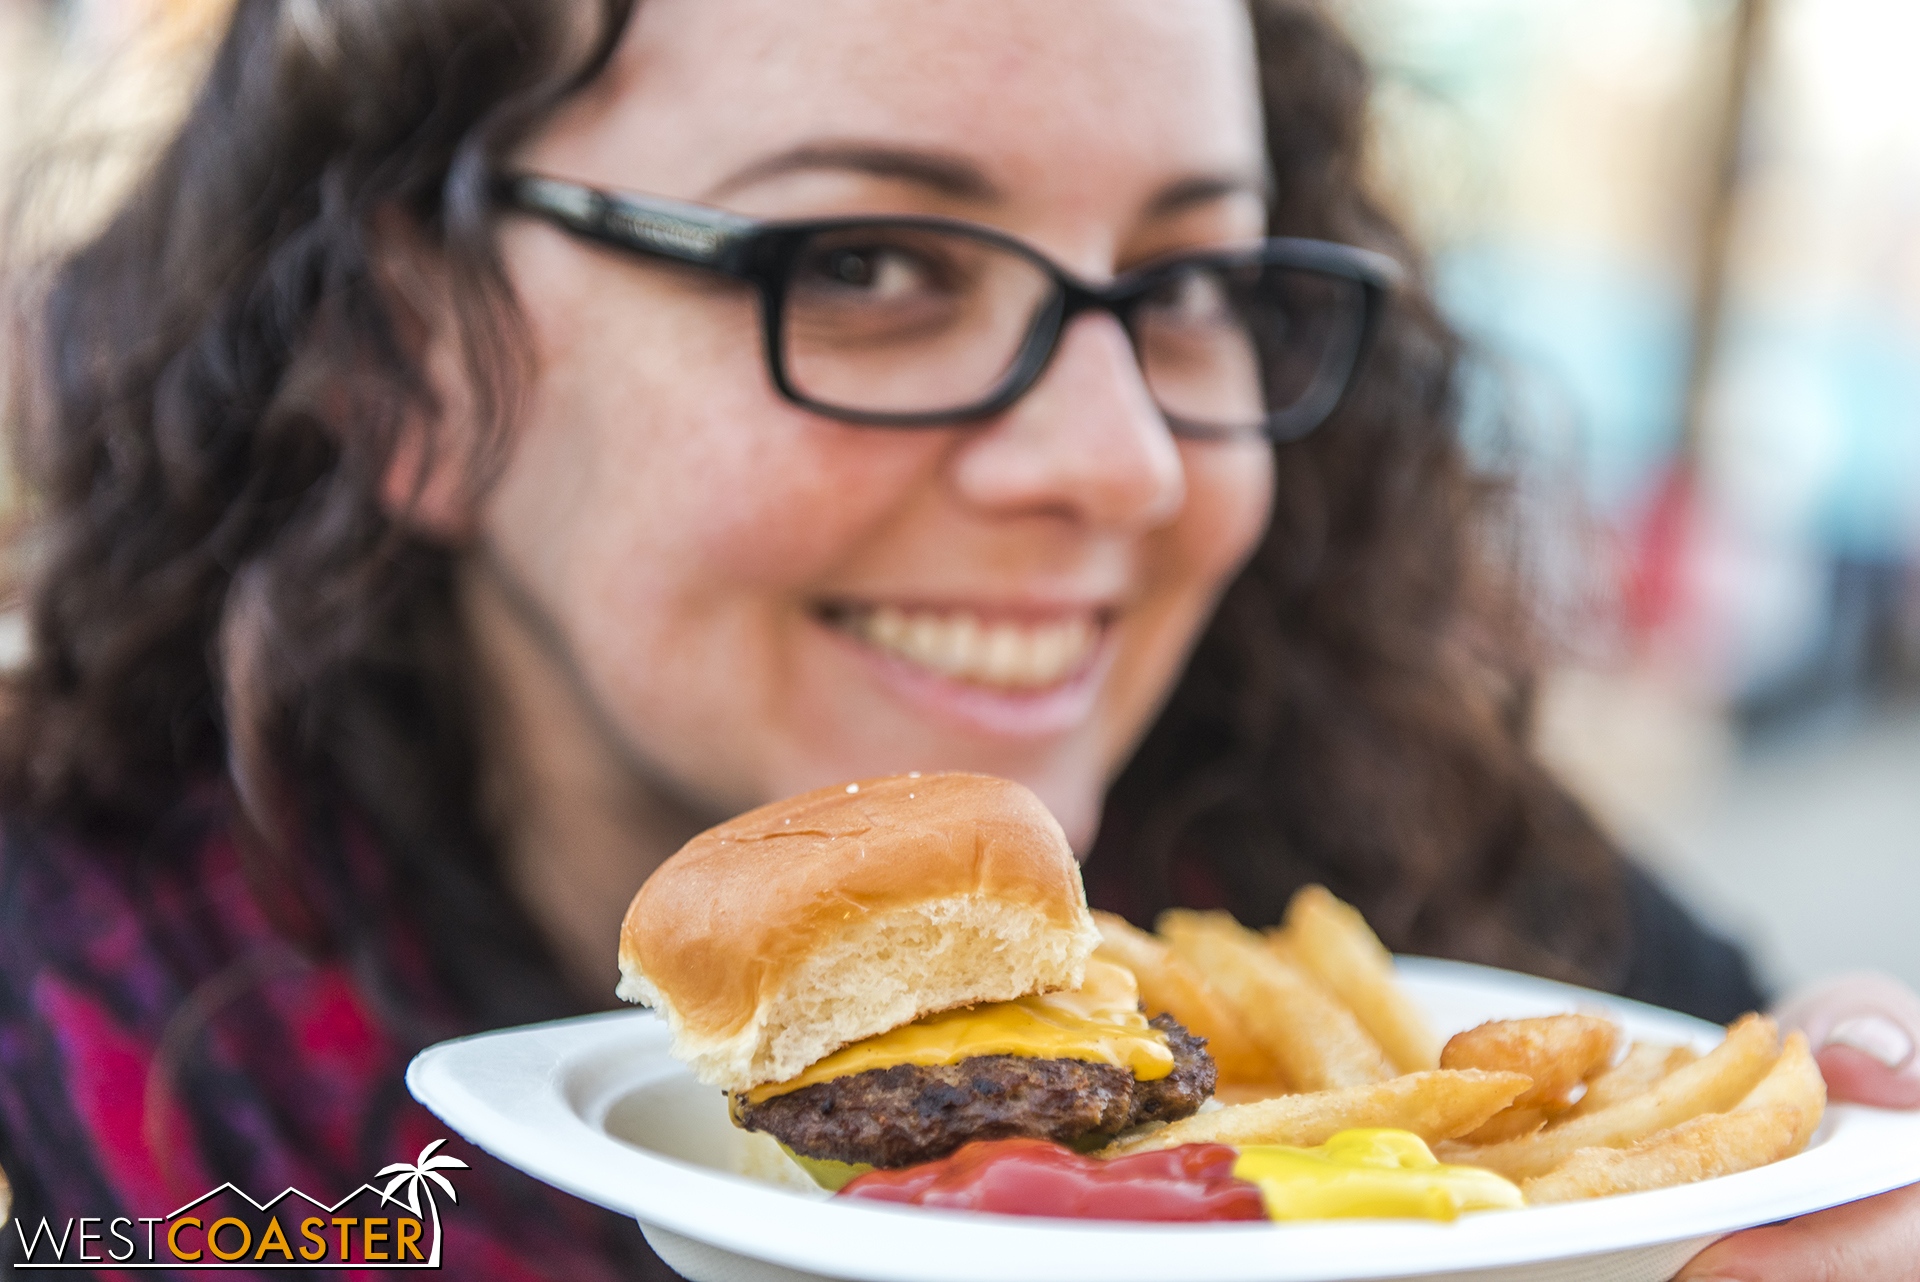  Coasters featured tasty sliders, as modeled by our lovely Jenny O. 